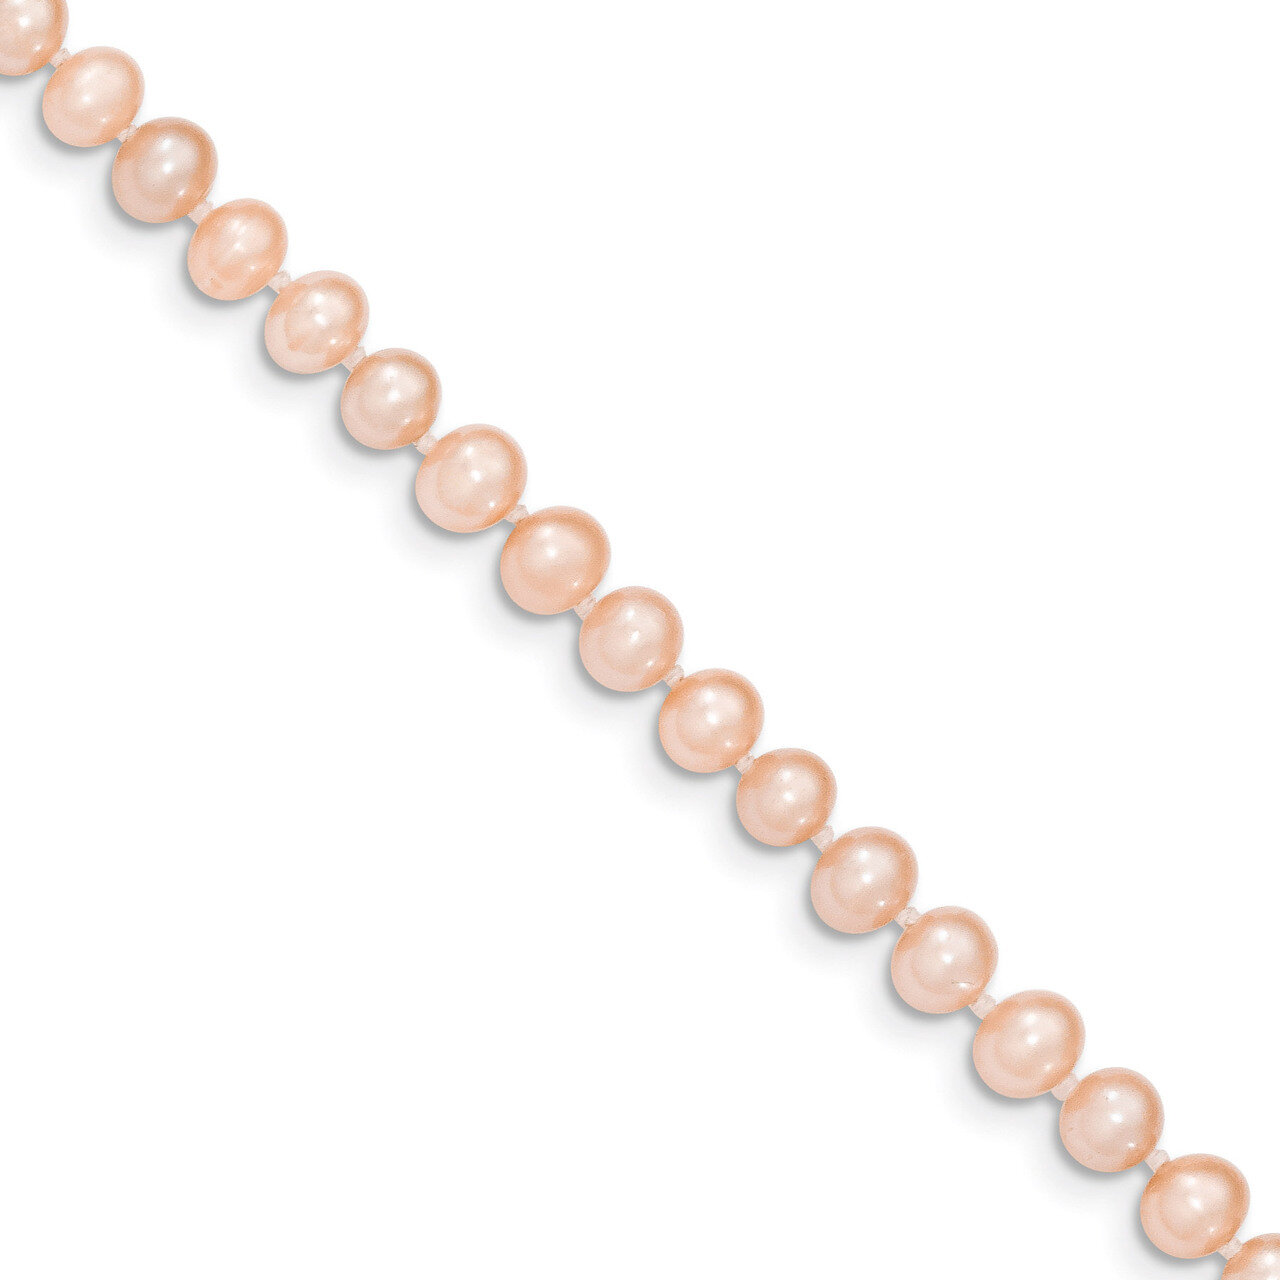 5-6mm Pink Cultured Near Round Pearl Necklace 24 Inch 14k Gold PPN050-24